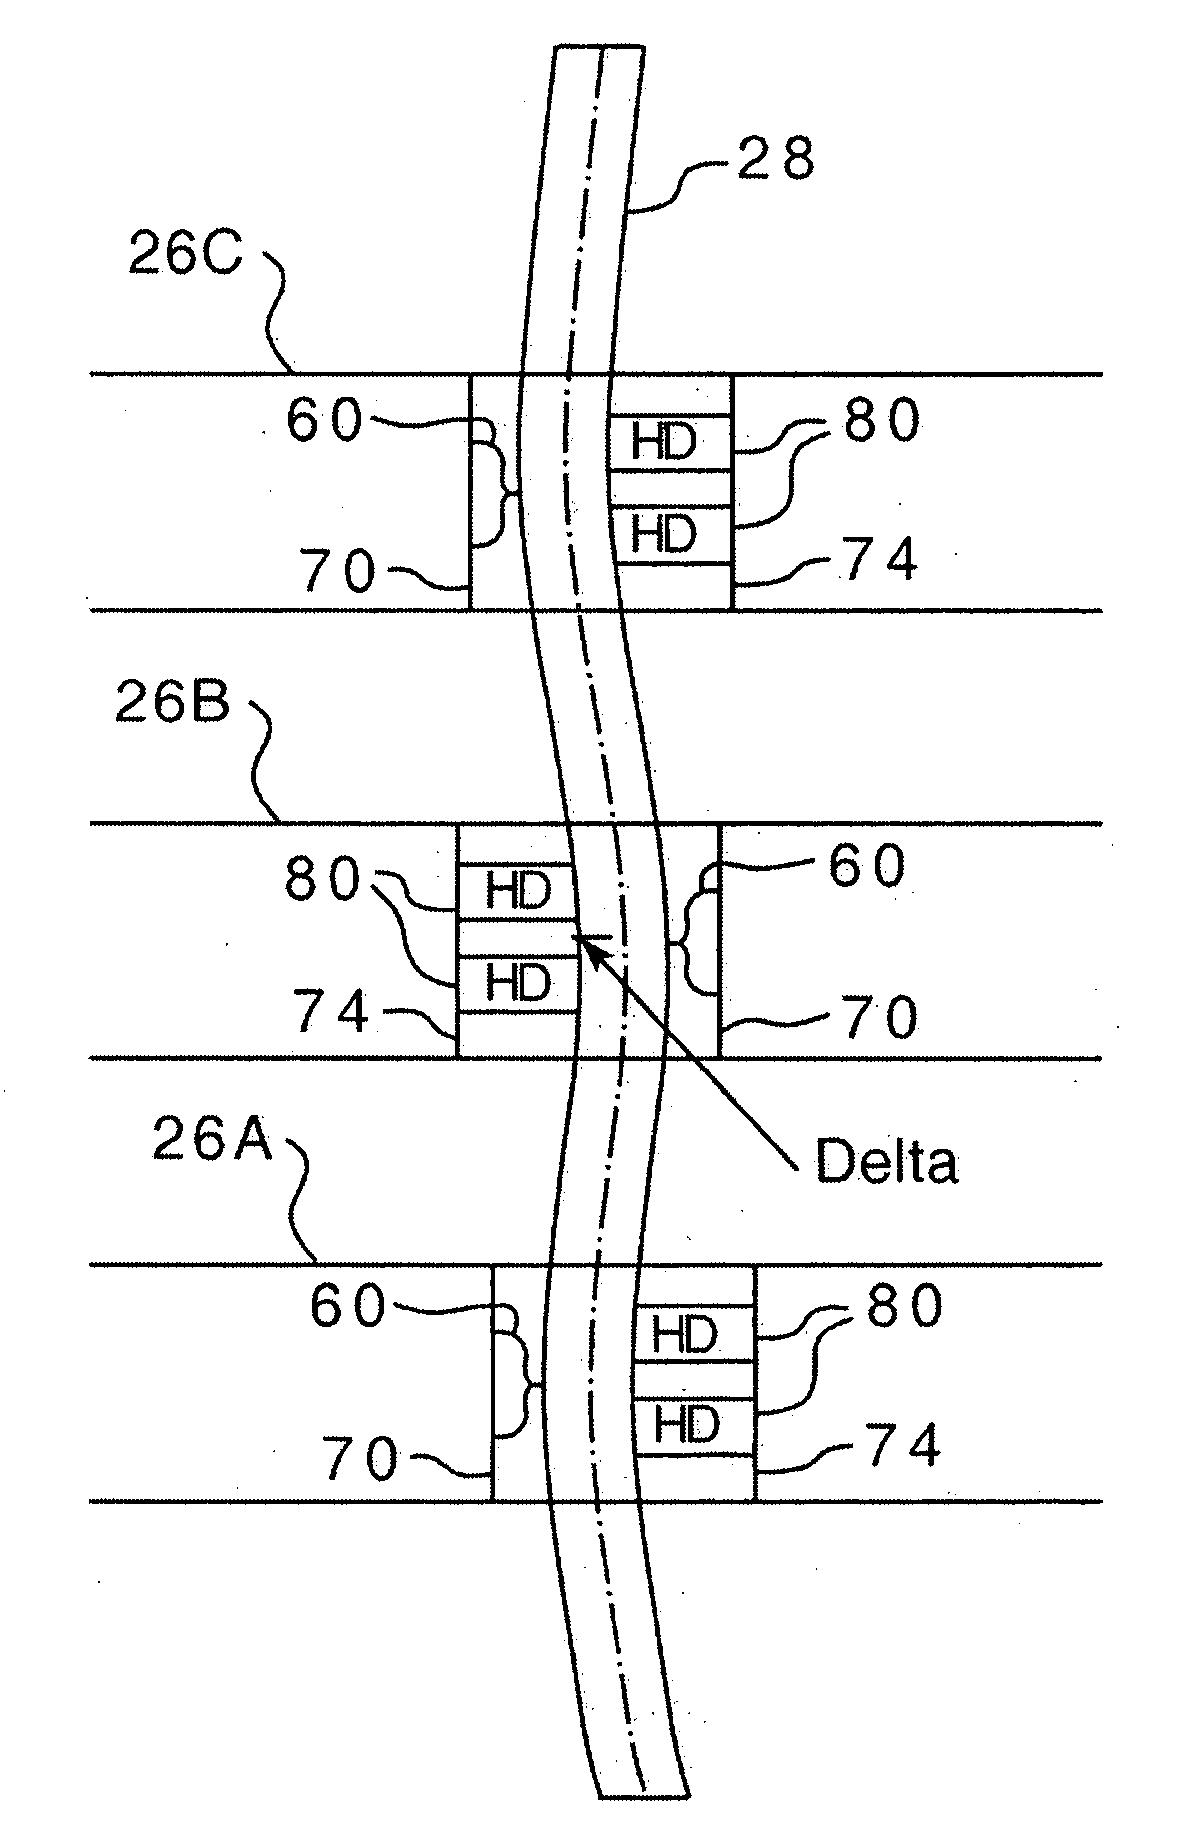 Eccentric support grid for nuclear fuel assembly